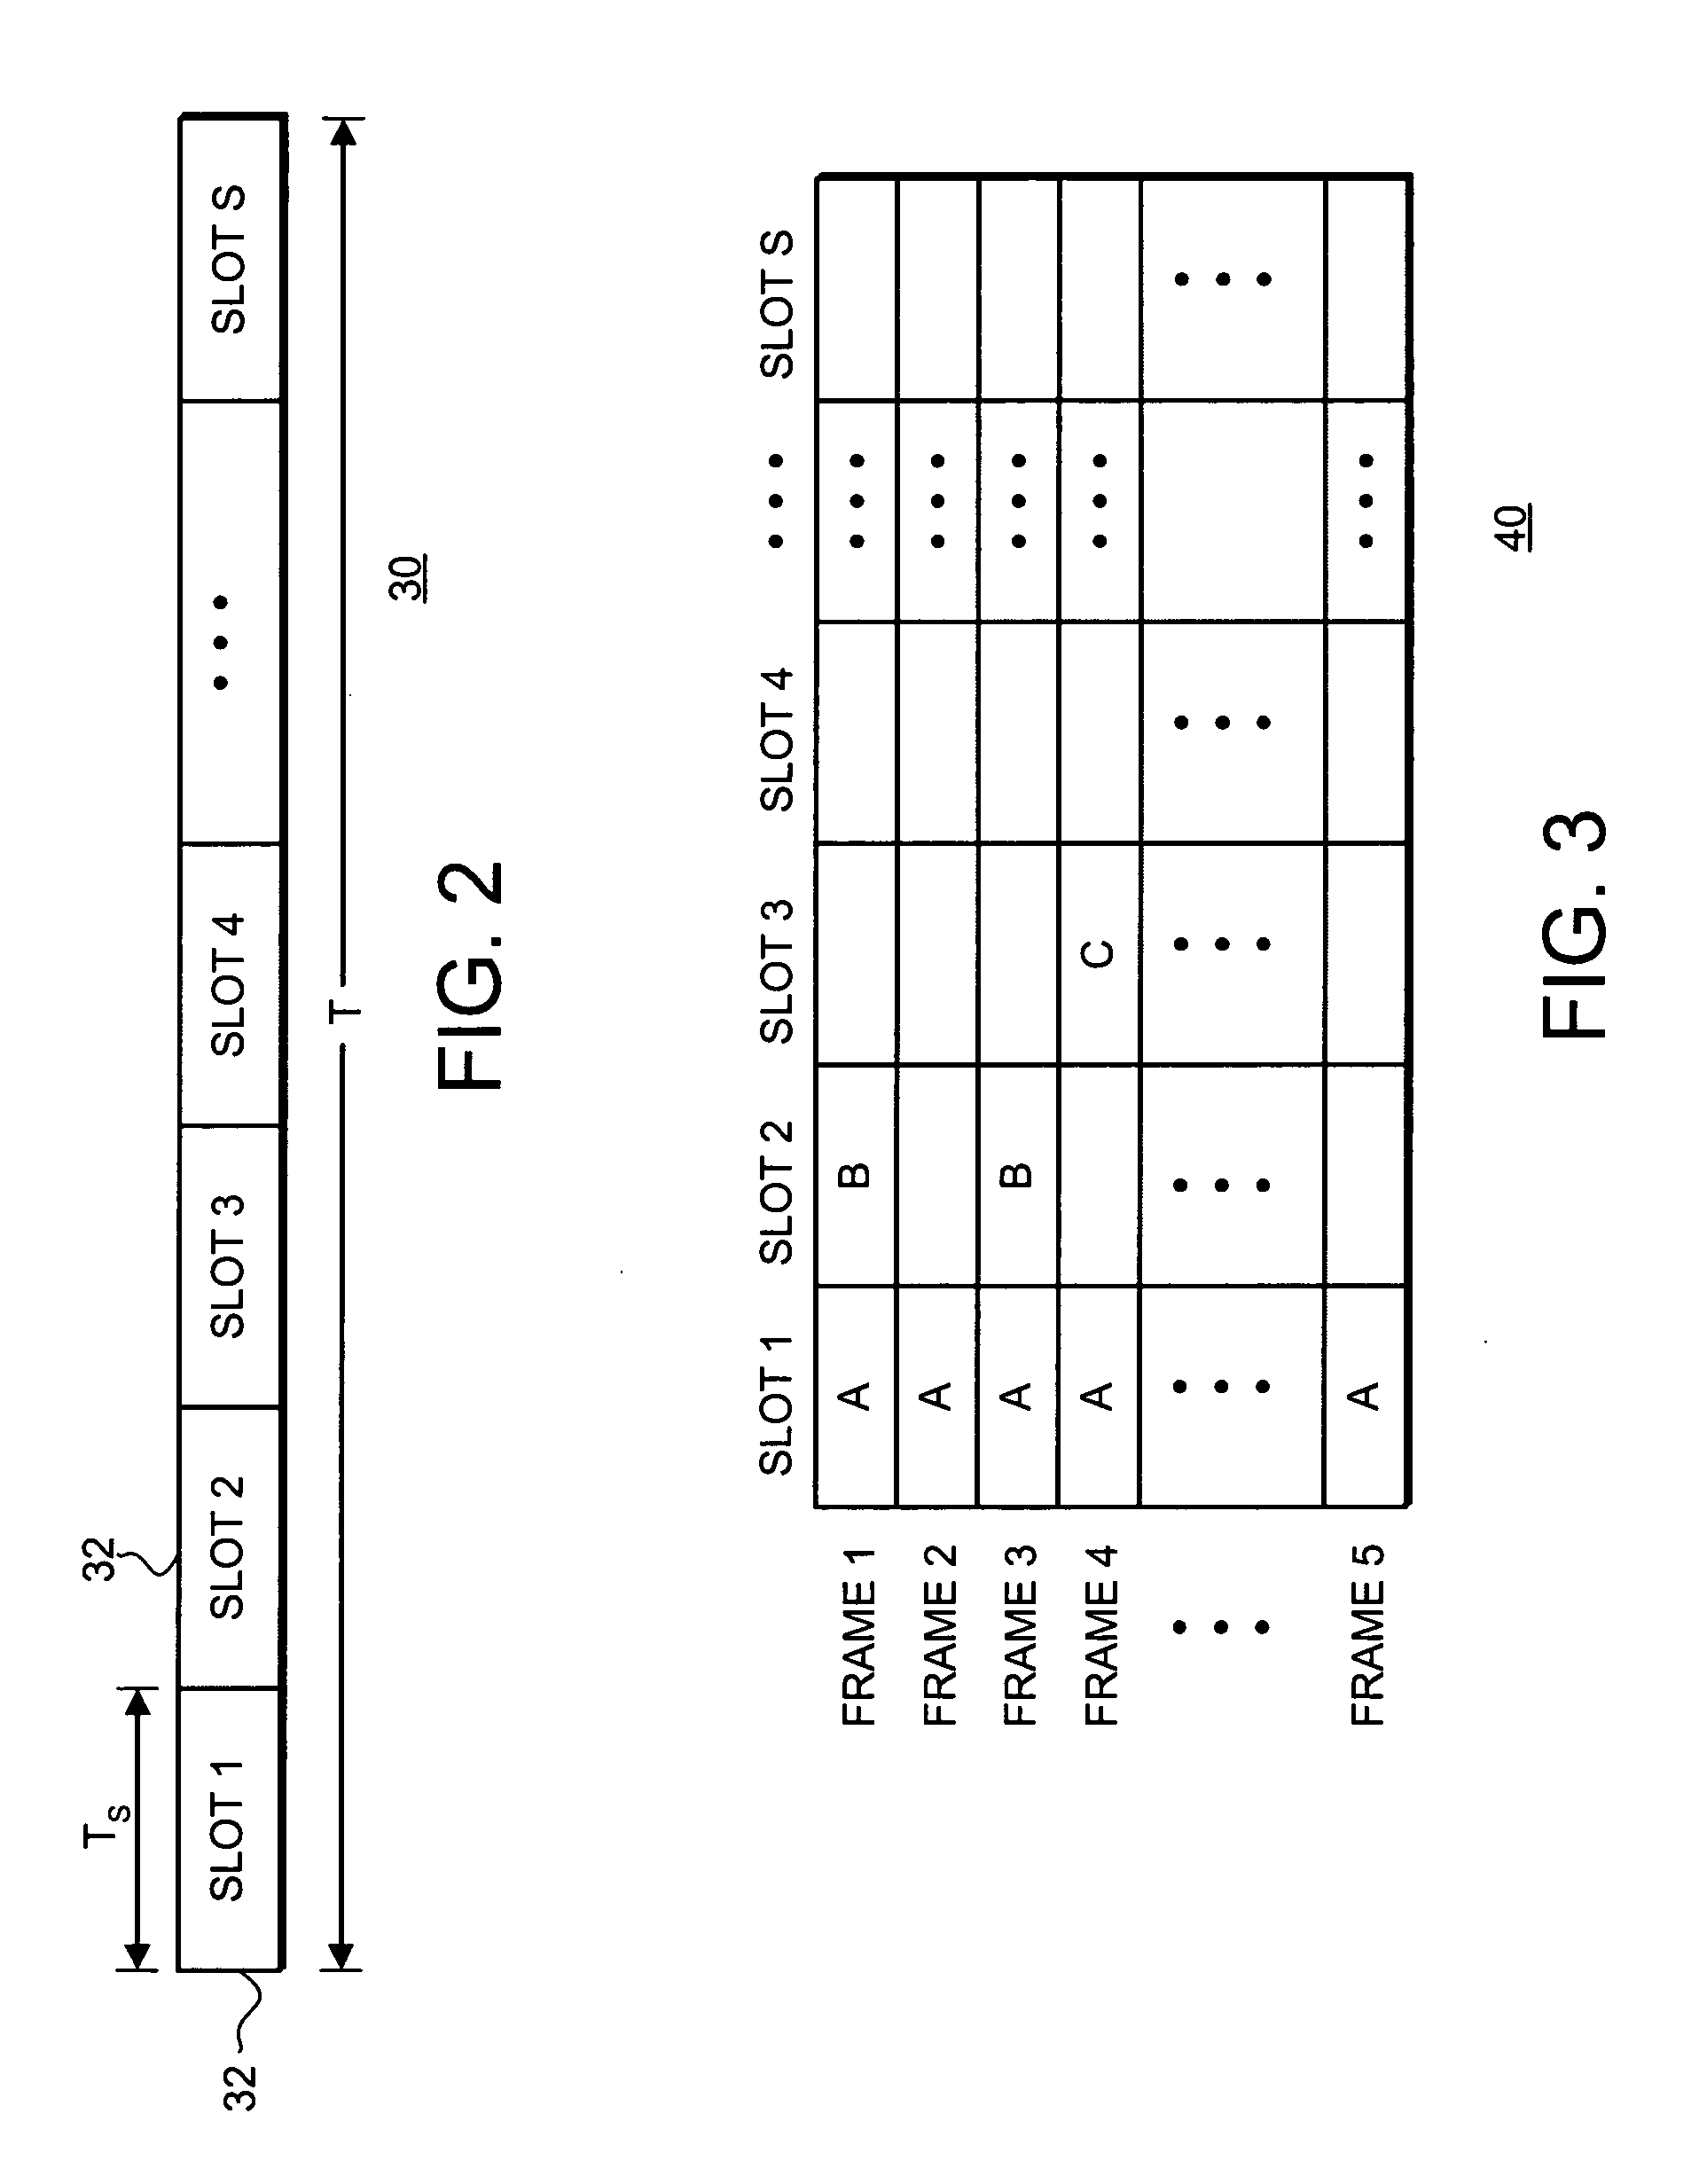 System and method for variable rate multiple access short message communications